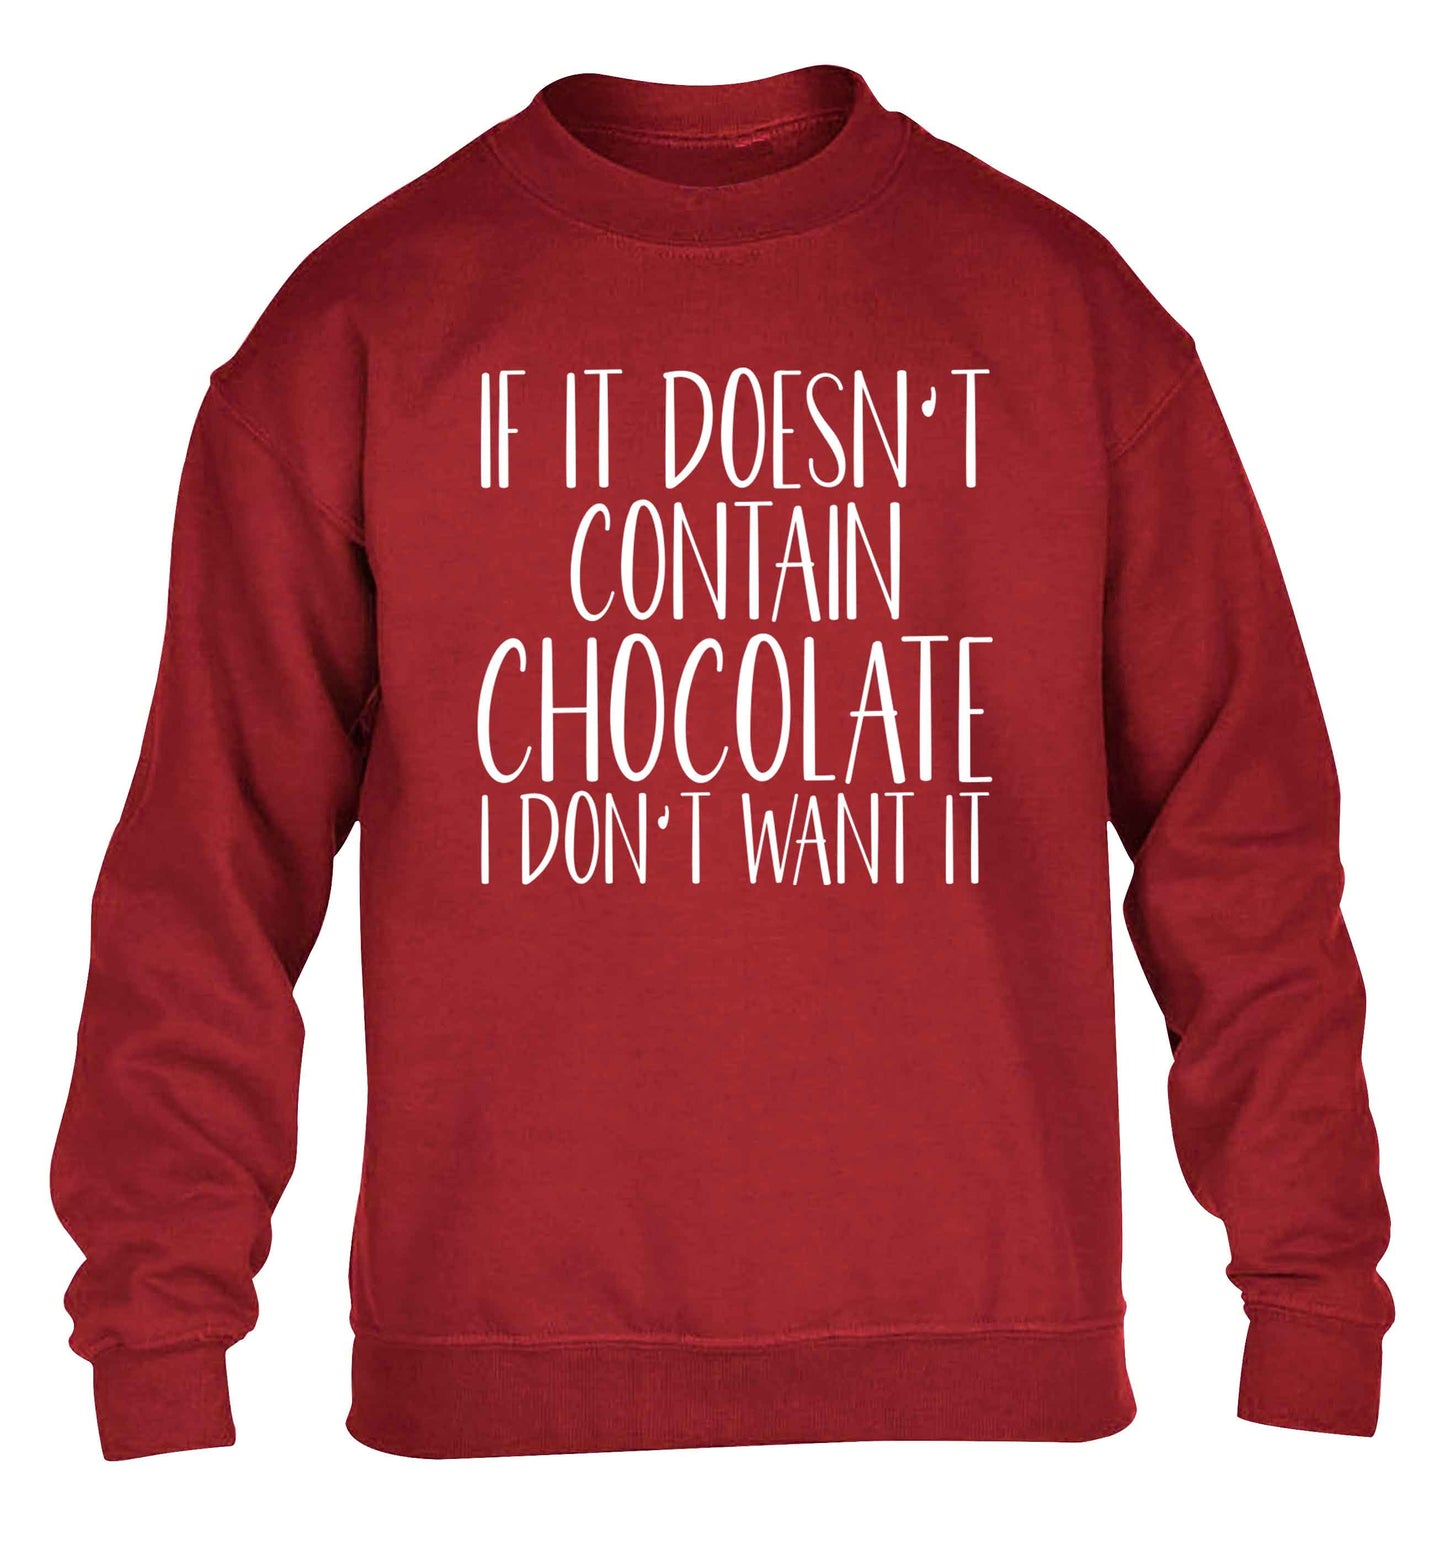 If it doesn't contain chocolate I don't want it children's grey sweater 12-13 Years